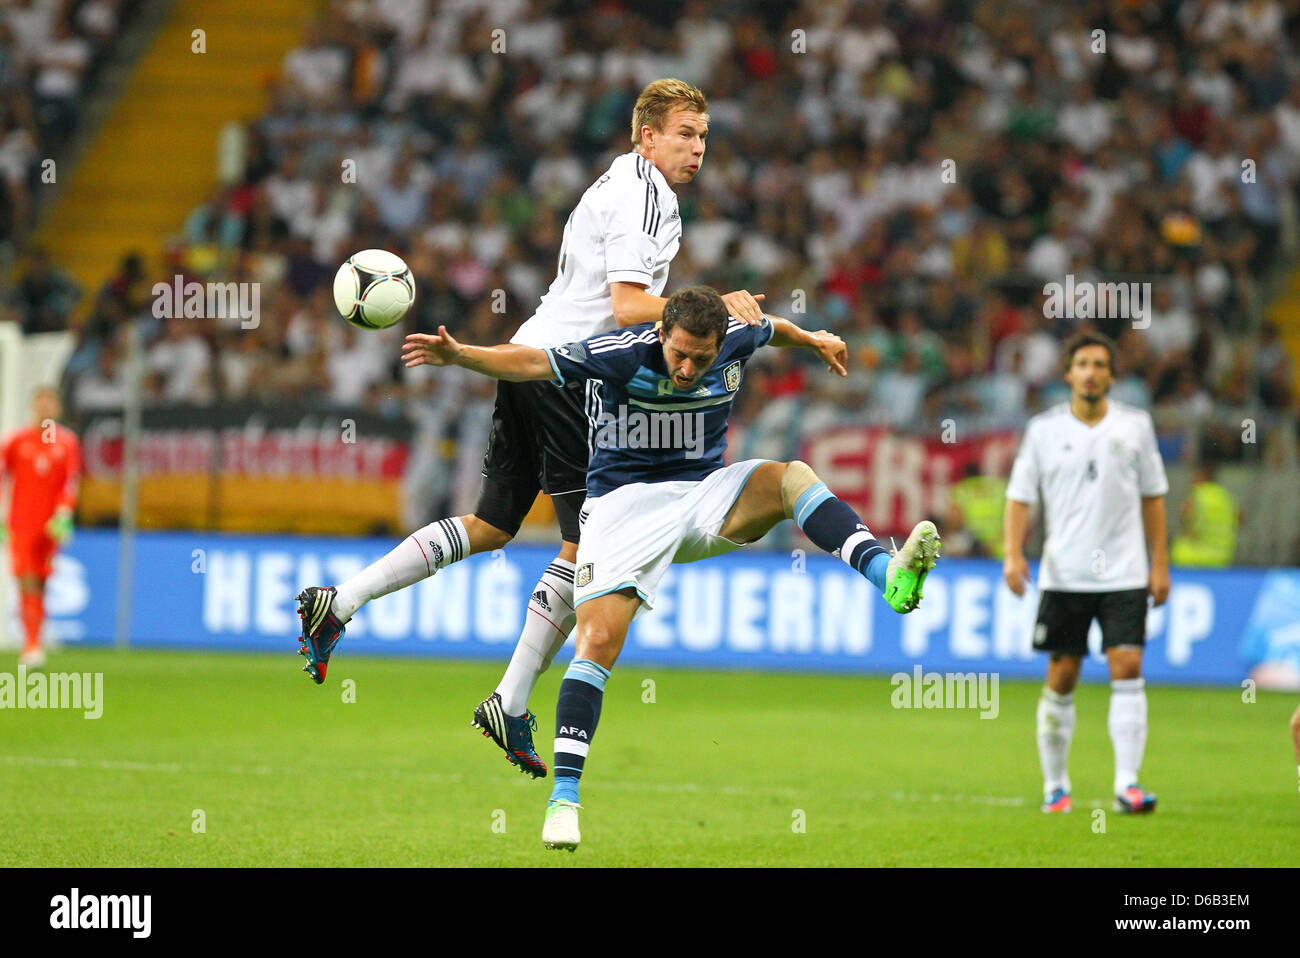 Germany's Holger Badstuber (top) vies for the ball with Argentina's Gonzalo Higuain during the friendly soccer match between Germany and Argentina at the Commerzbank-Arena in Frankfurt/Main, Germany, 15 August 2012. Photo: Revierfoto Stock Photo